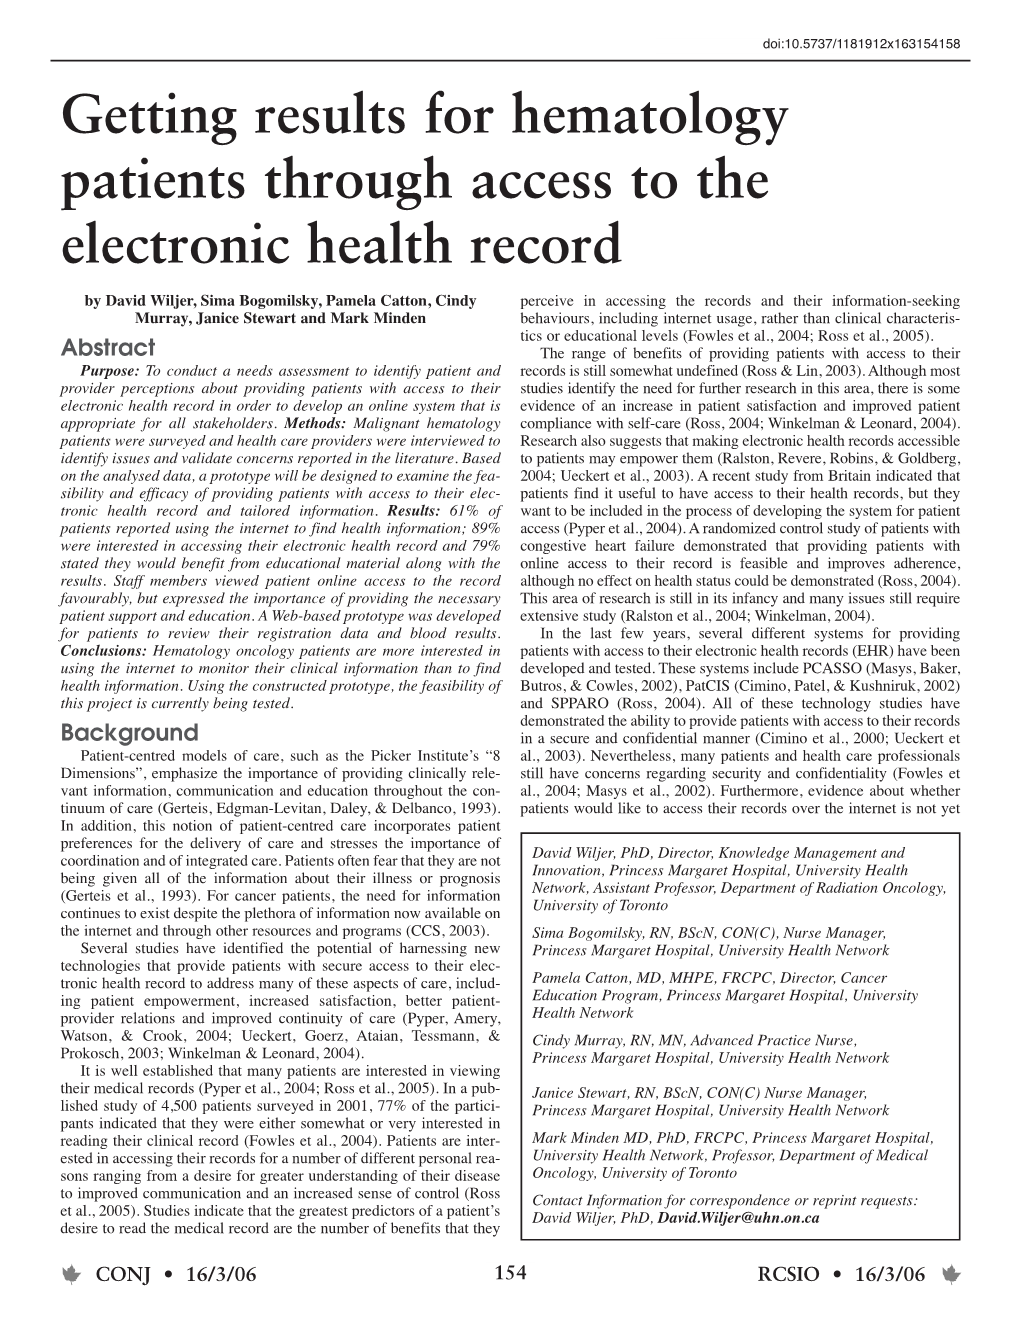 Getting Results for Hematology Patients Through Access to the Electronic Health Record